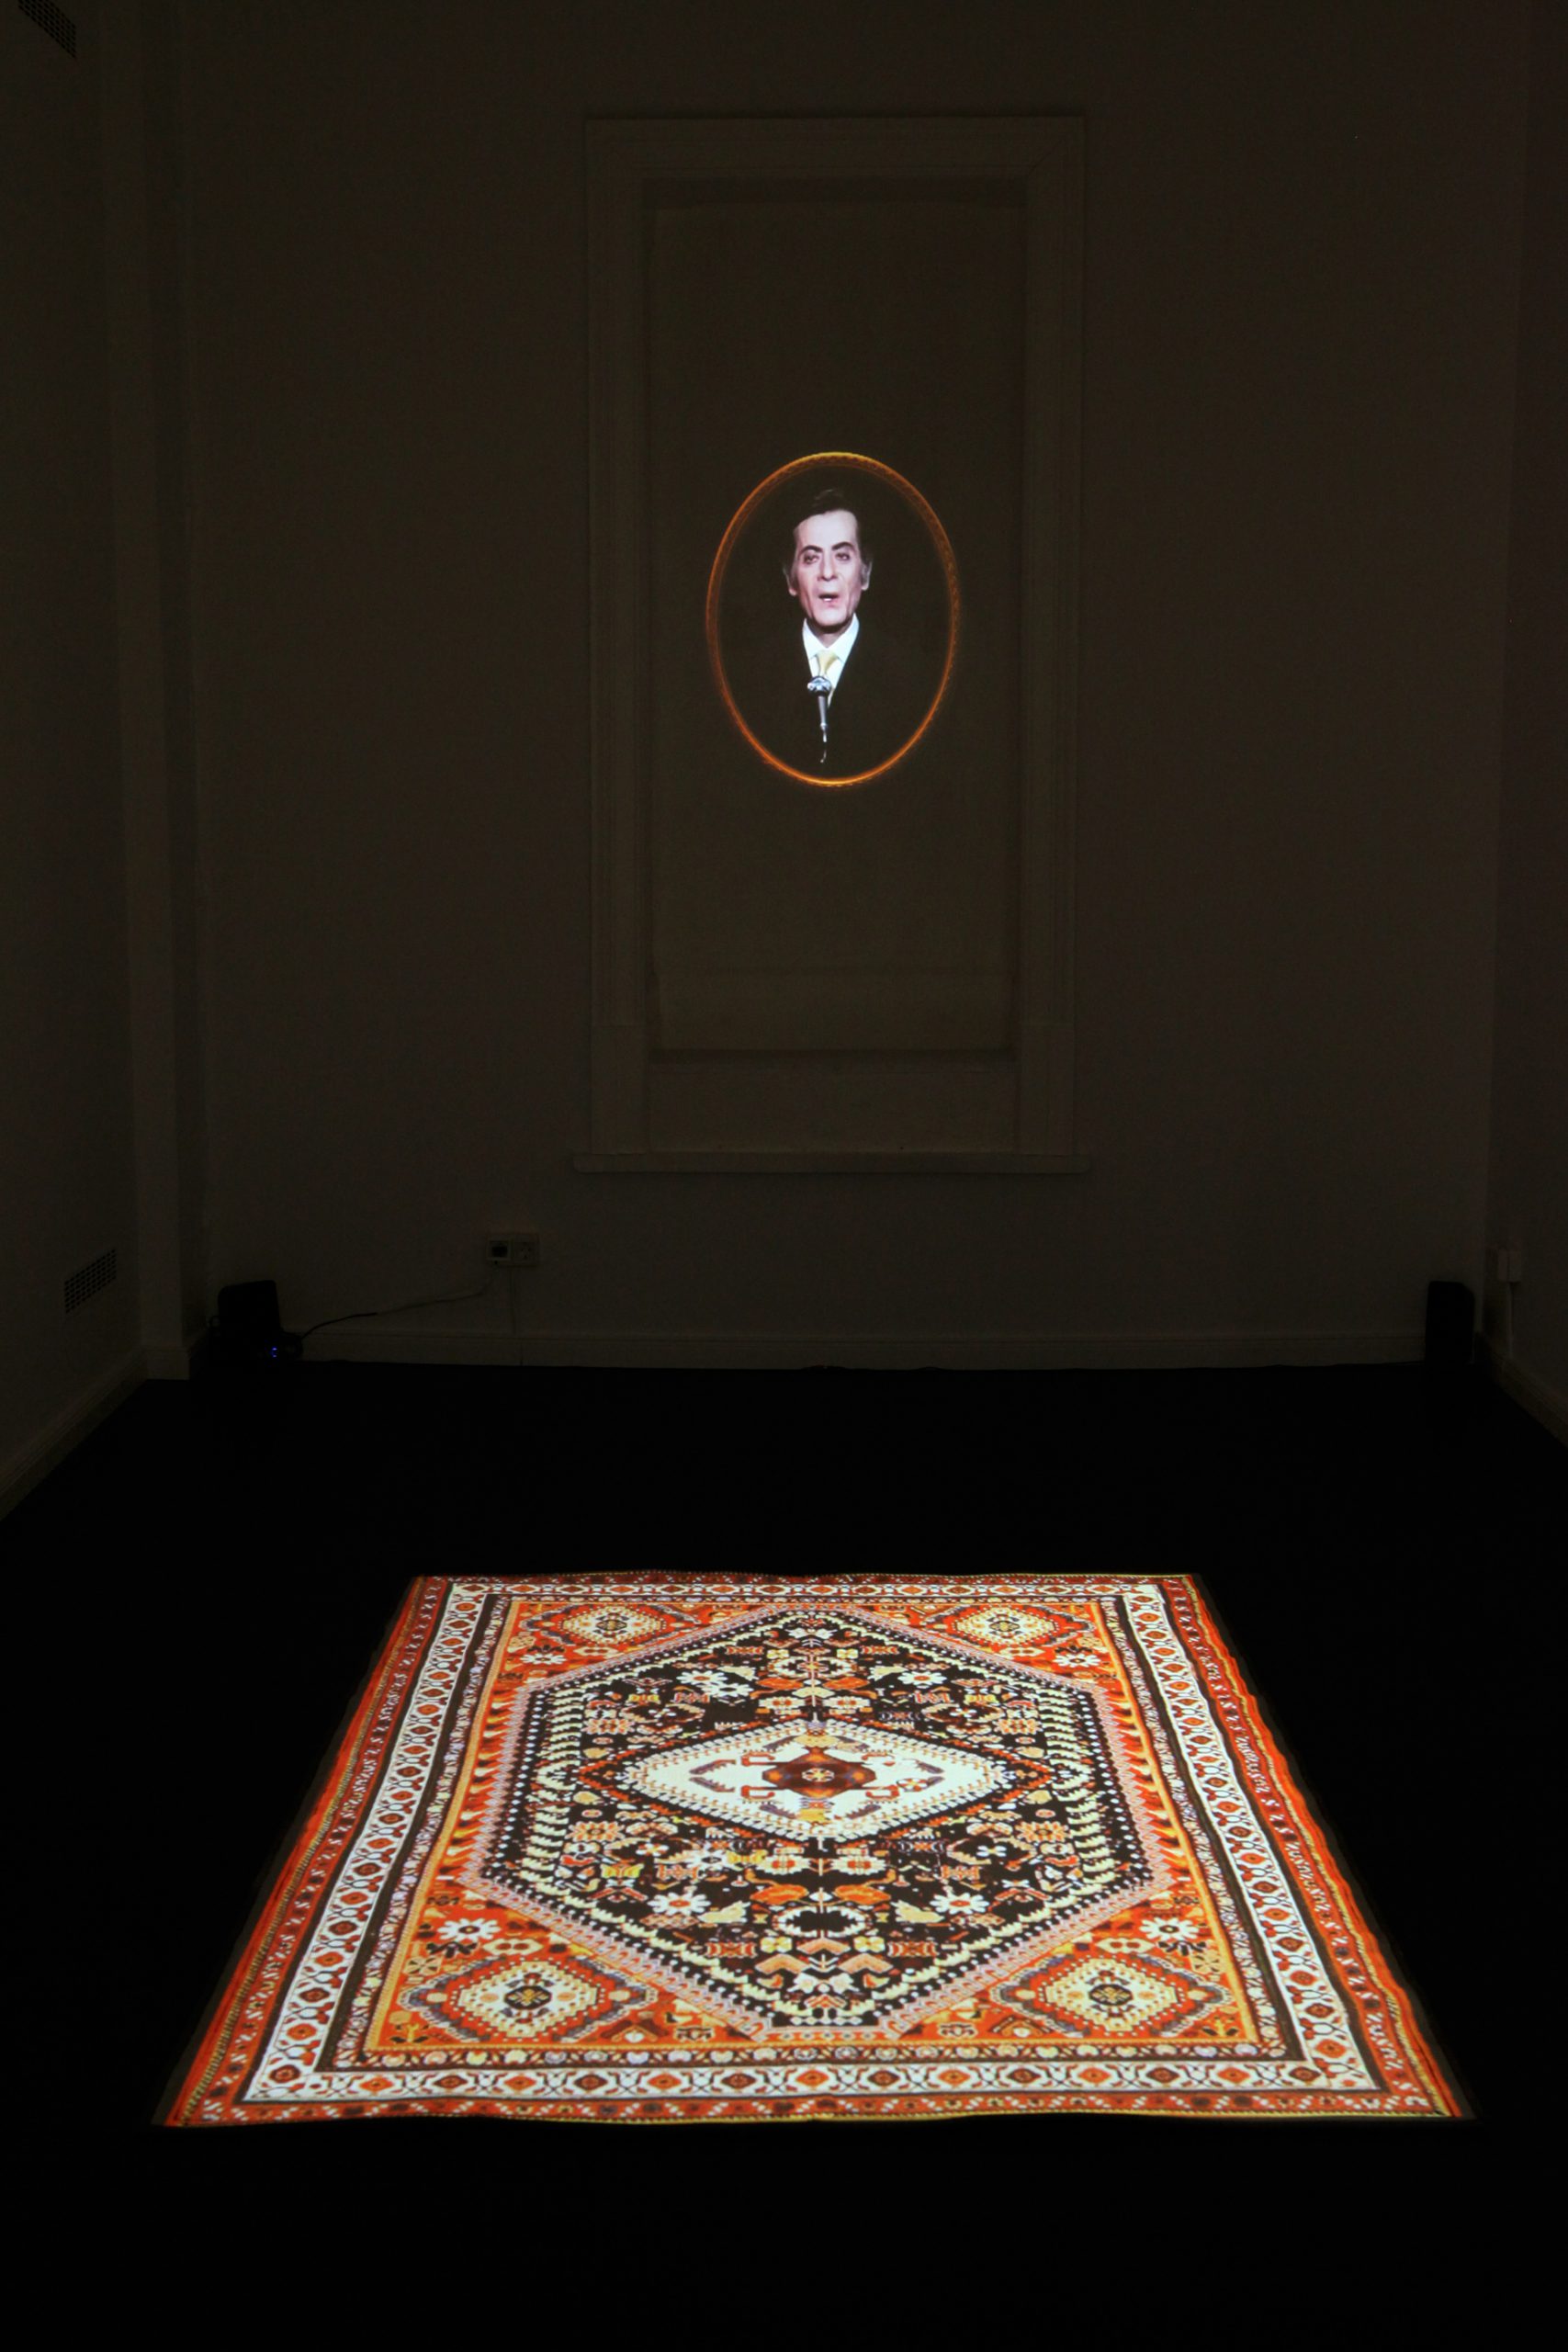 "Alashan Maleish Gherak",
2011,
two-channel video installation with a single-channel projection on manipulated tapestry gilded in
wooden frame, and a single channel animation projection on a floor rug, stereo sound, 
duration 06:00 min, 
oval frame dimensions 60 cm x 50 cm, 
dimensions variable